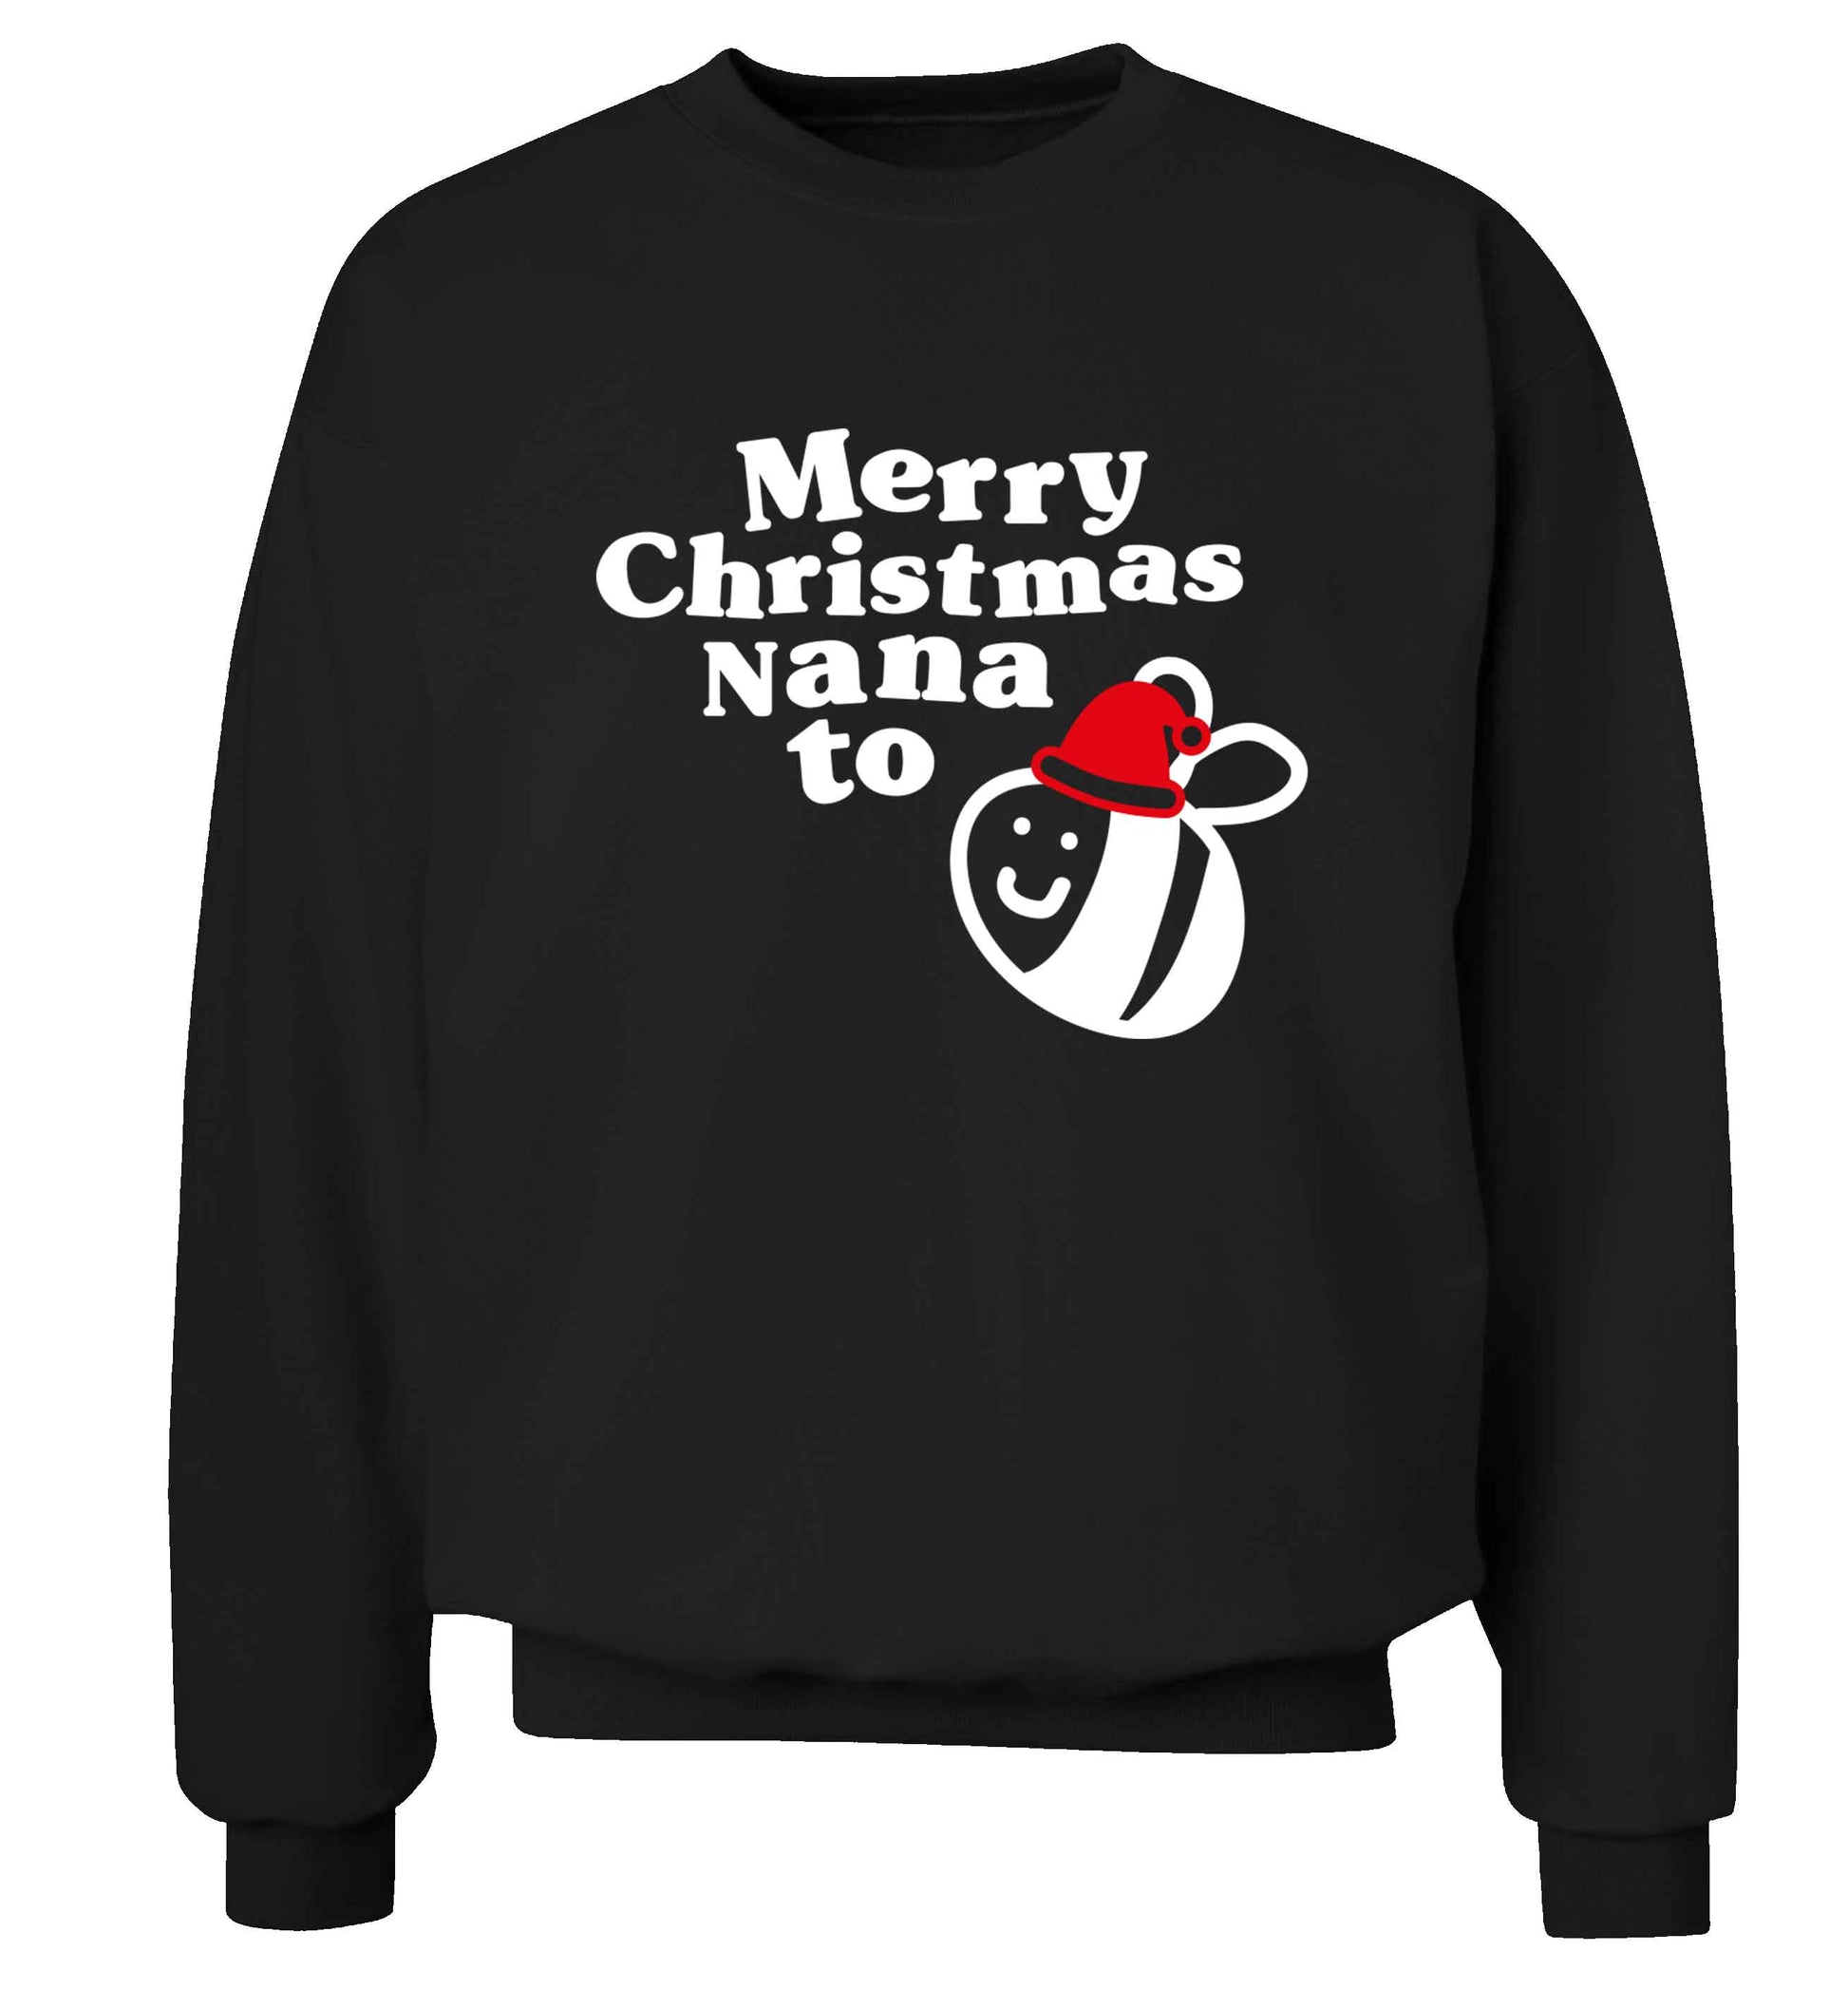 Merry Christmas nana to be Adult's unisex black Sweater 2XL